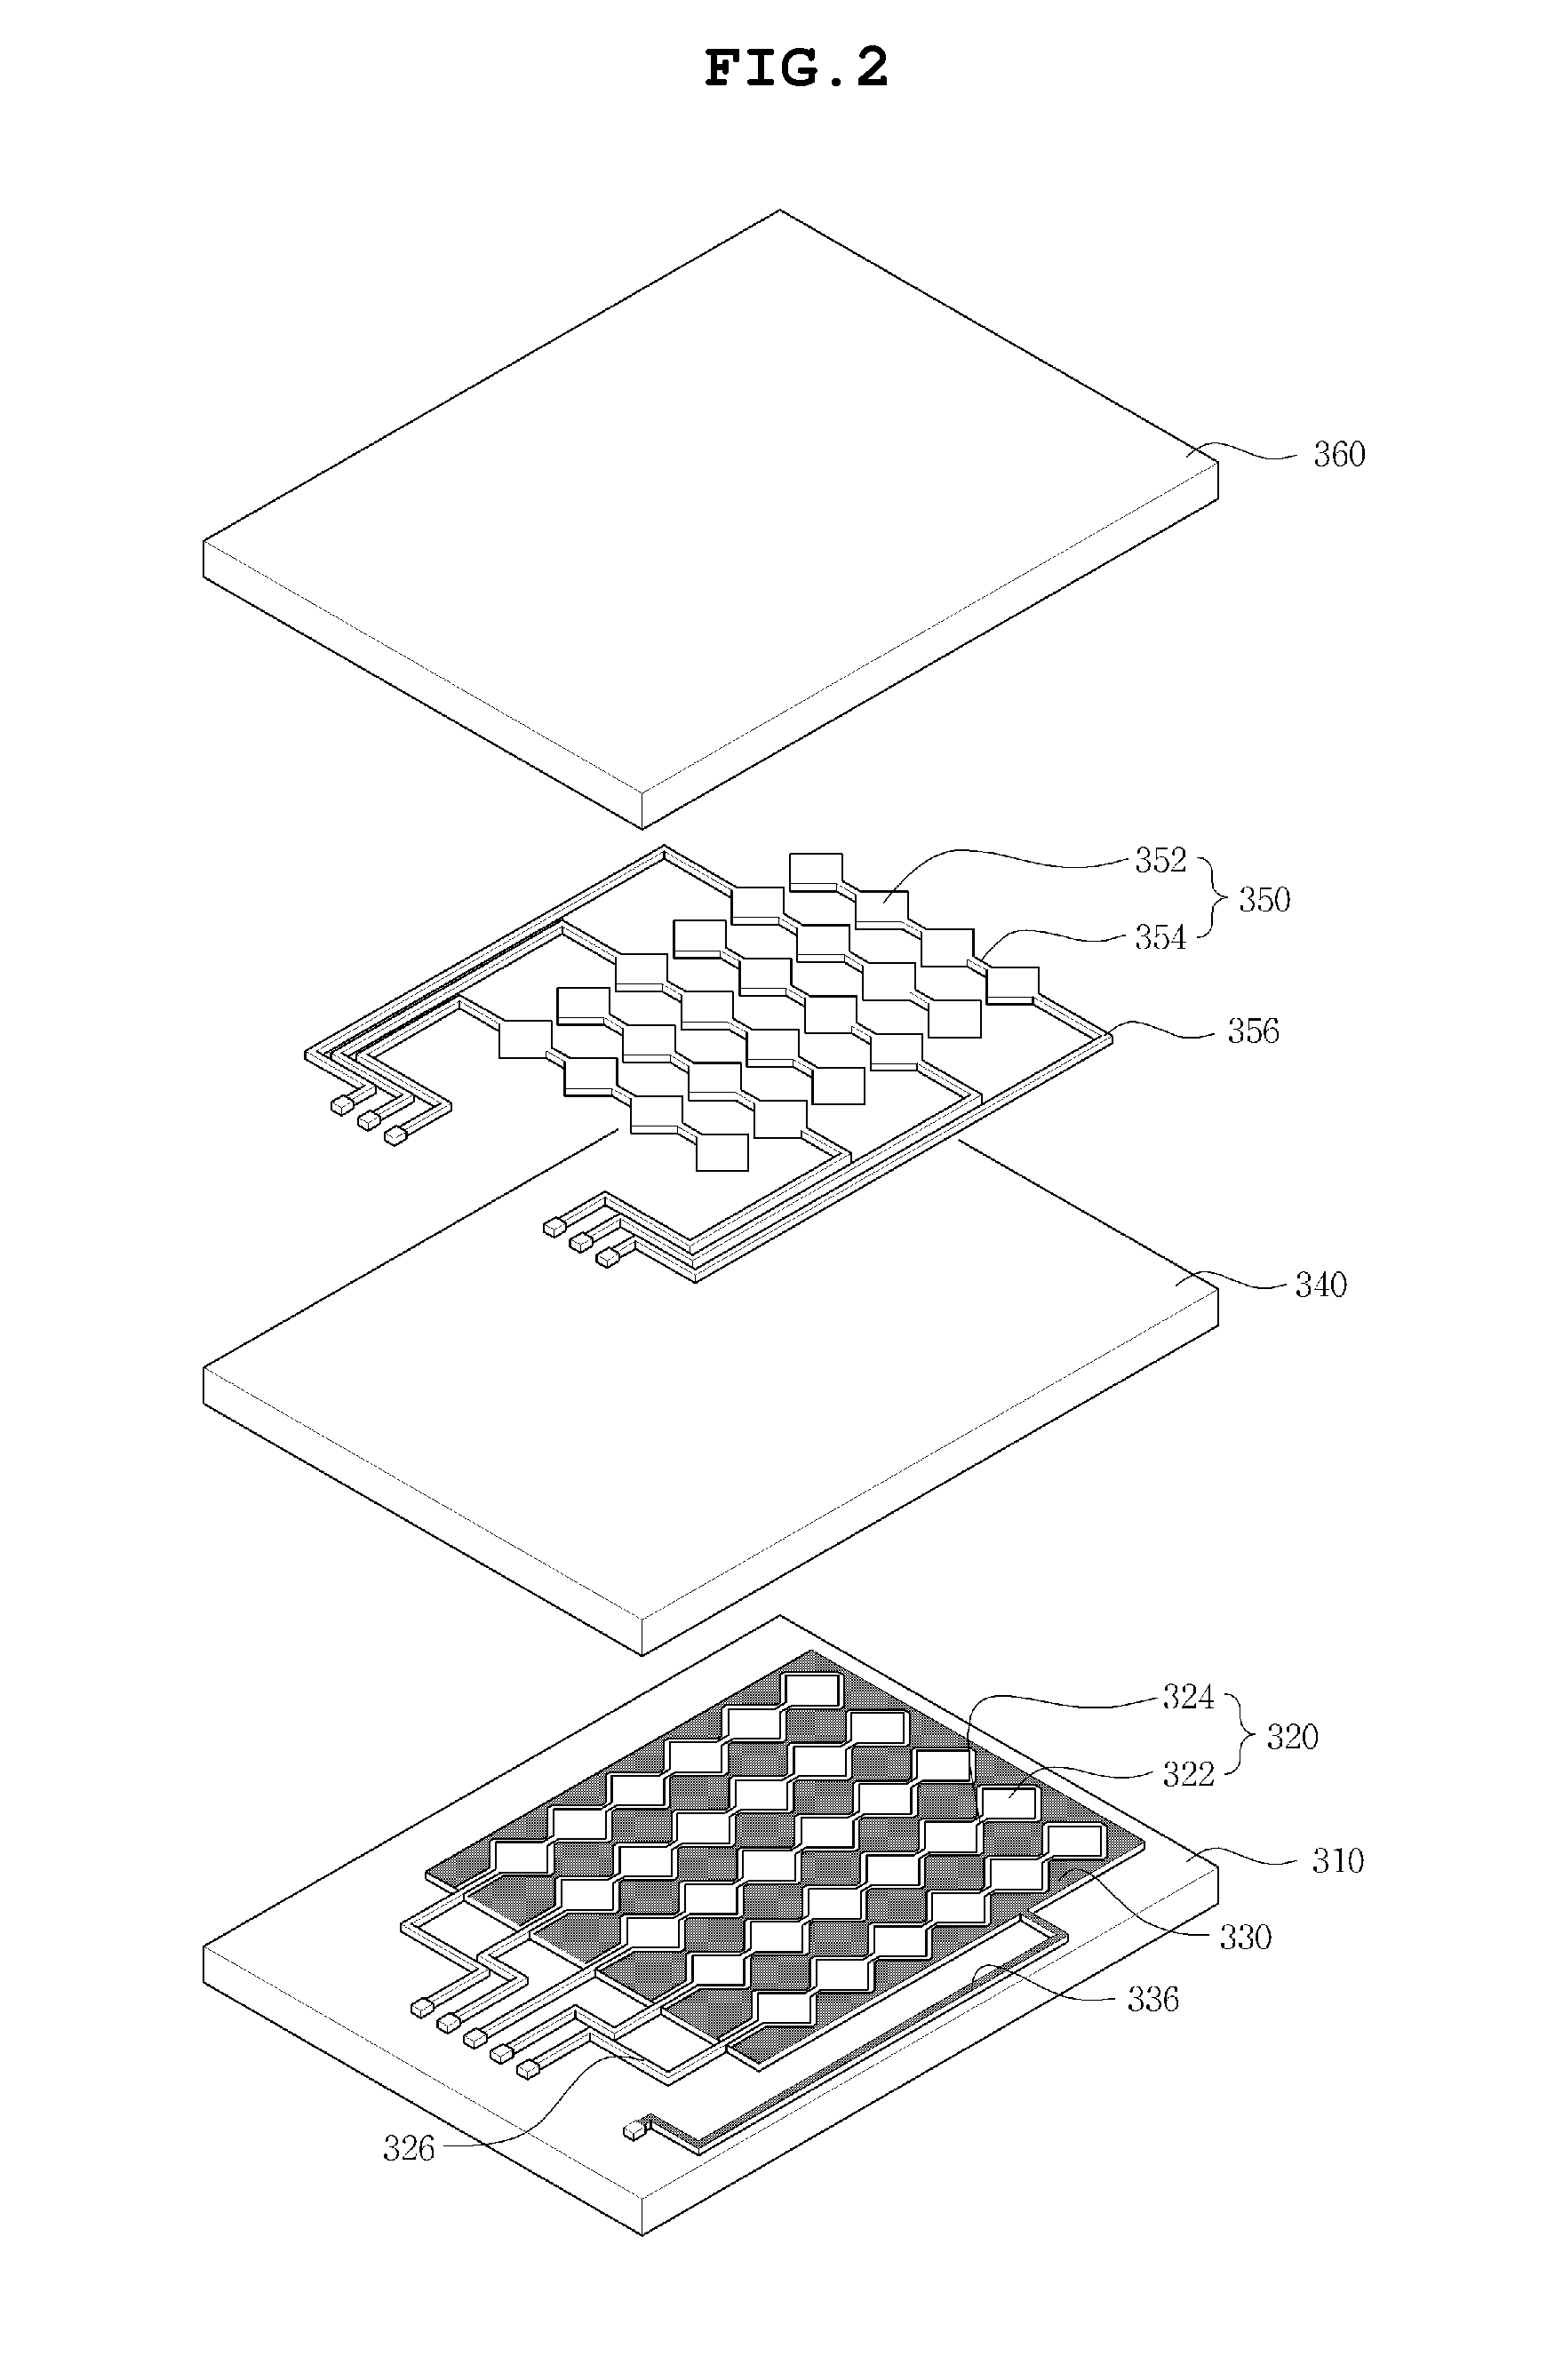 Display device having capacitive touch screen